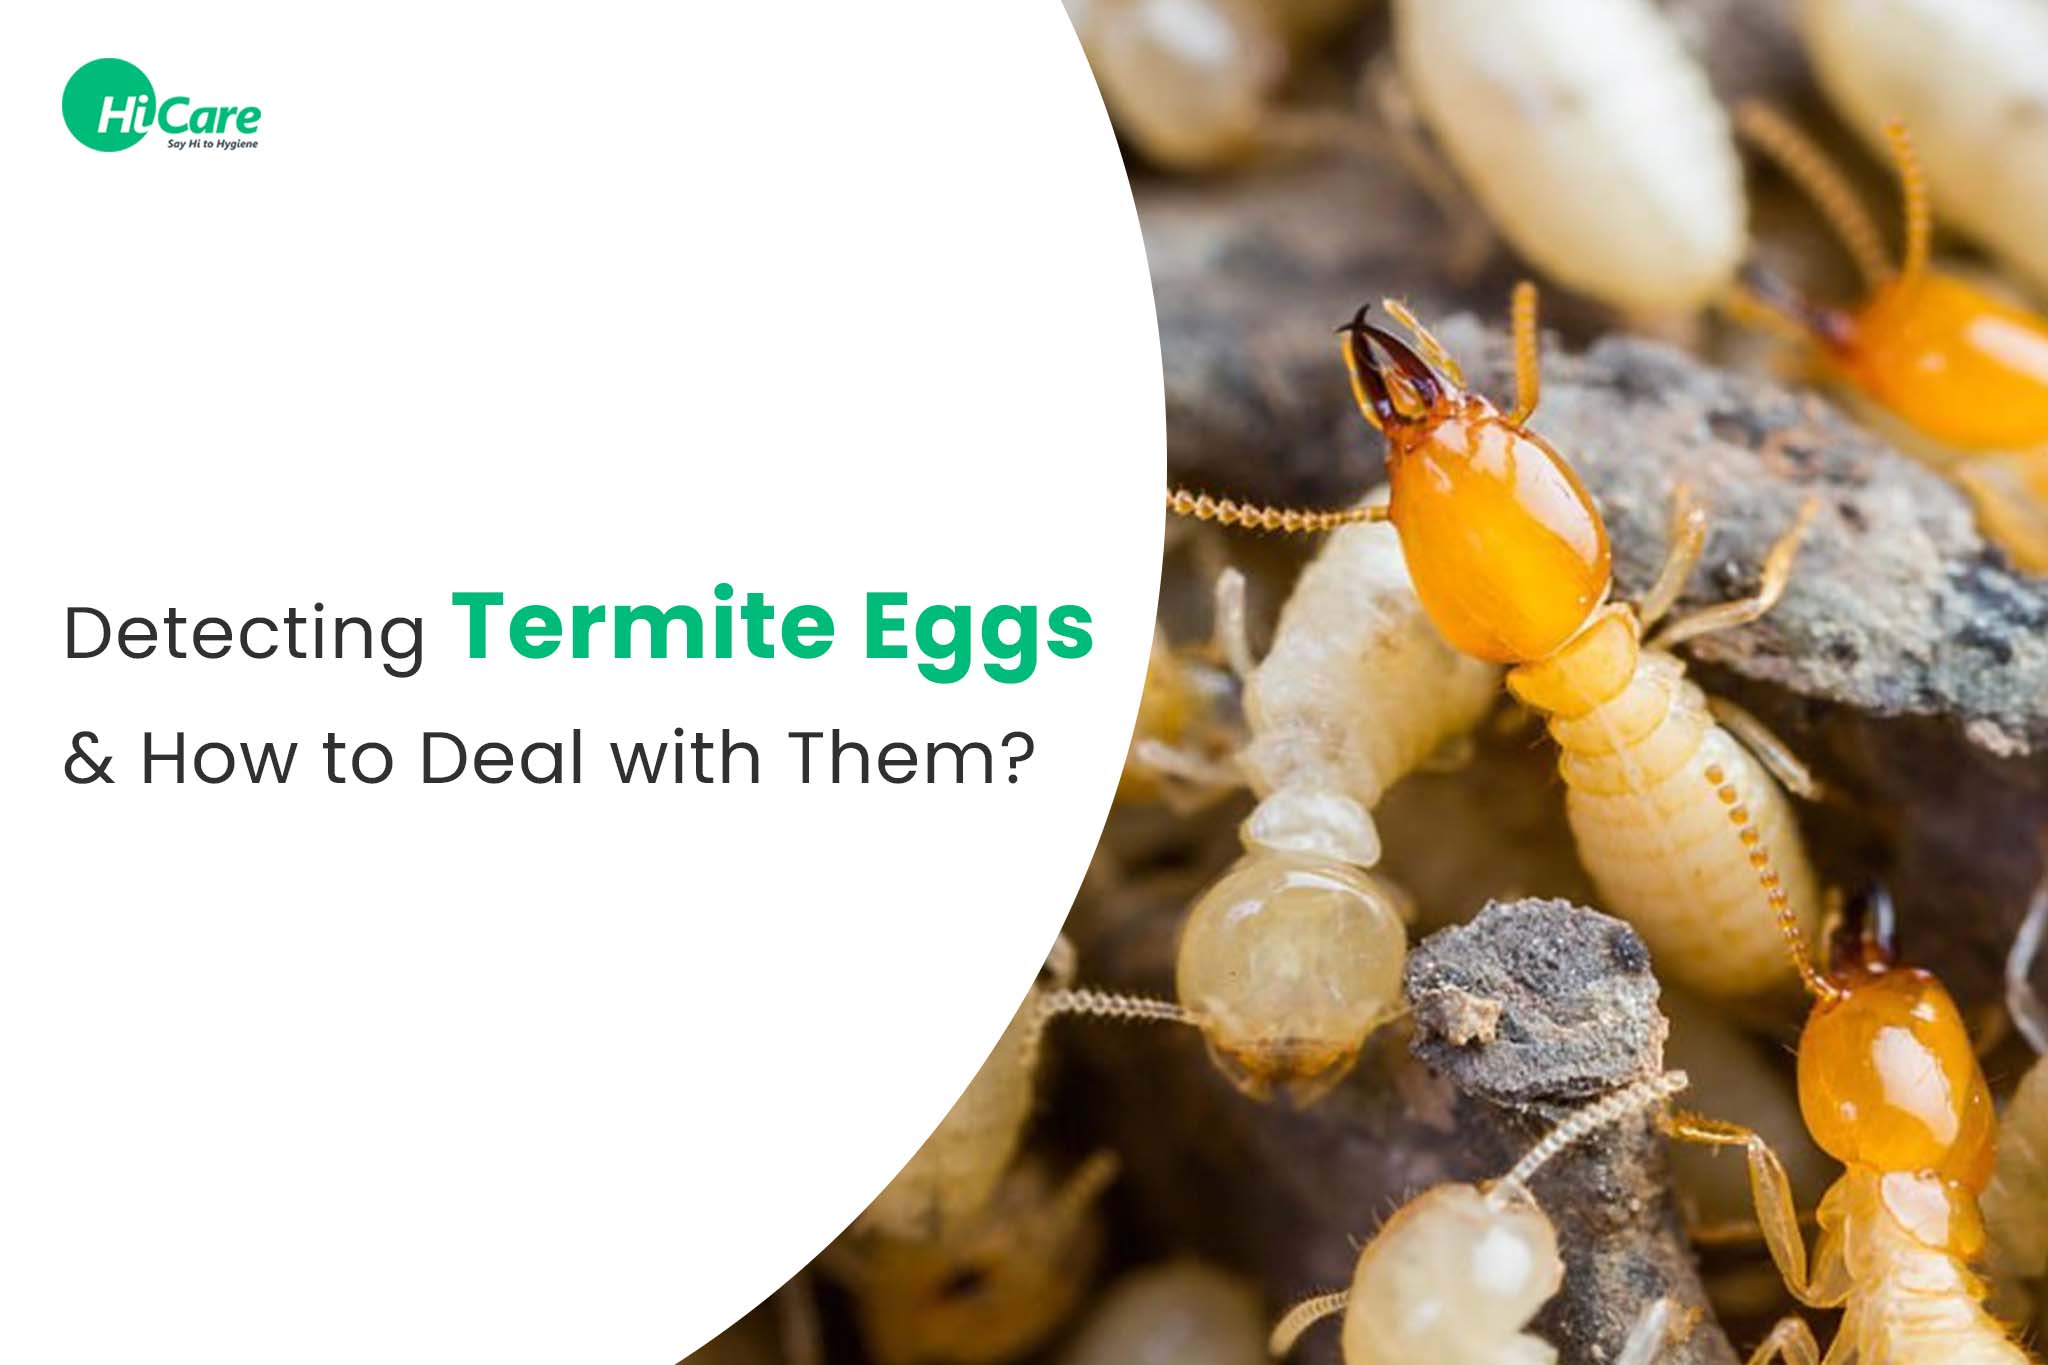 How to Detect Termite Eggs and Prevent Your Home from Termites?